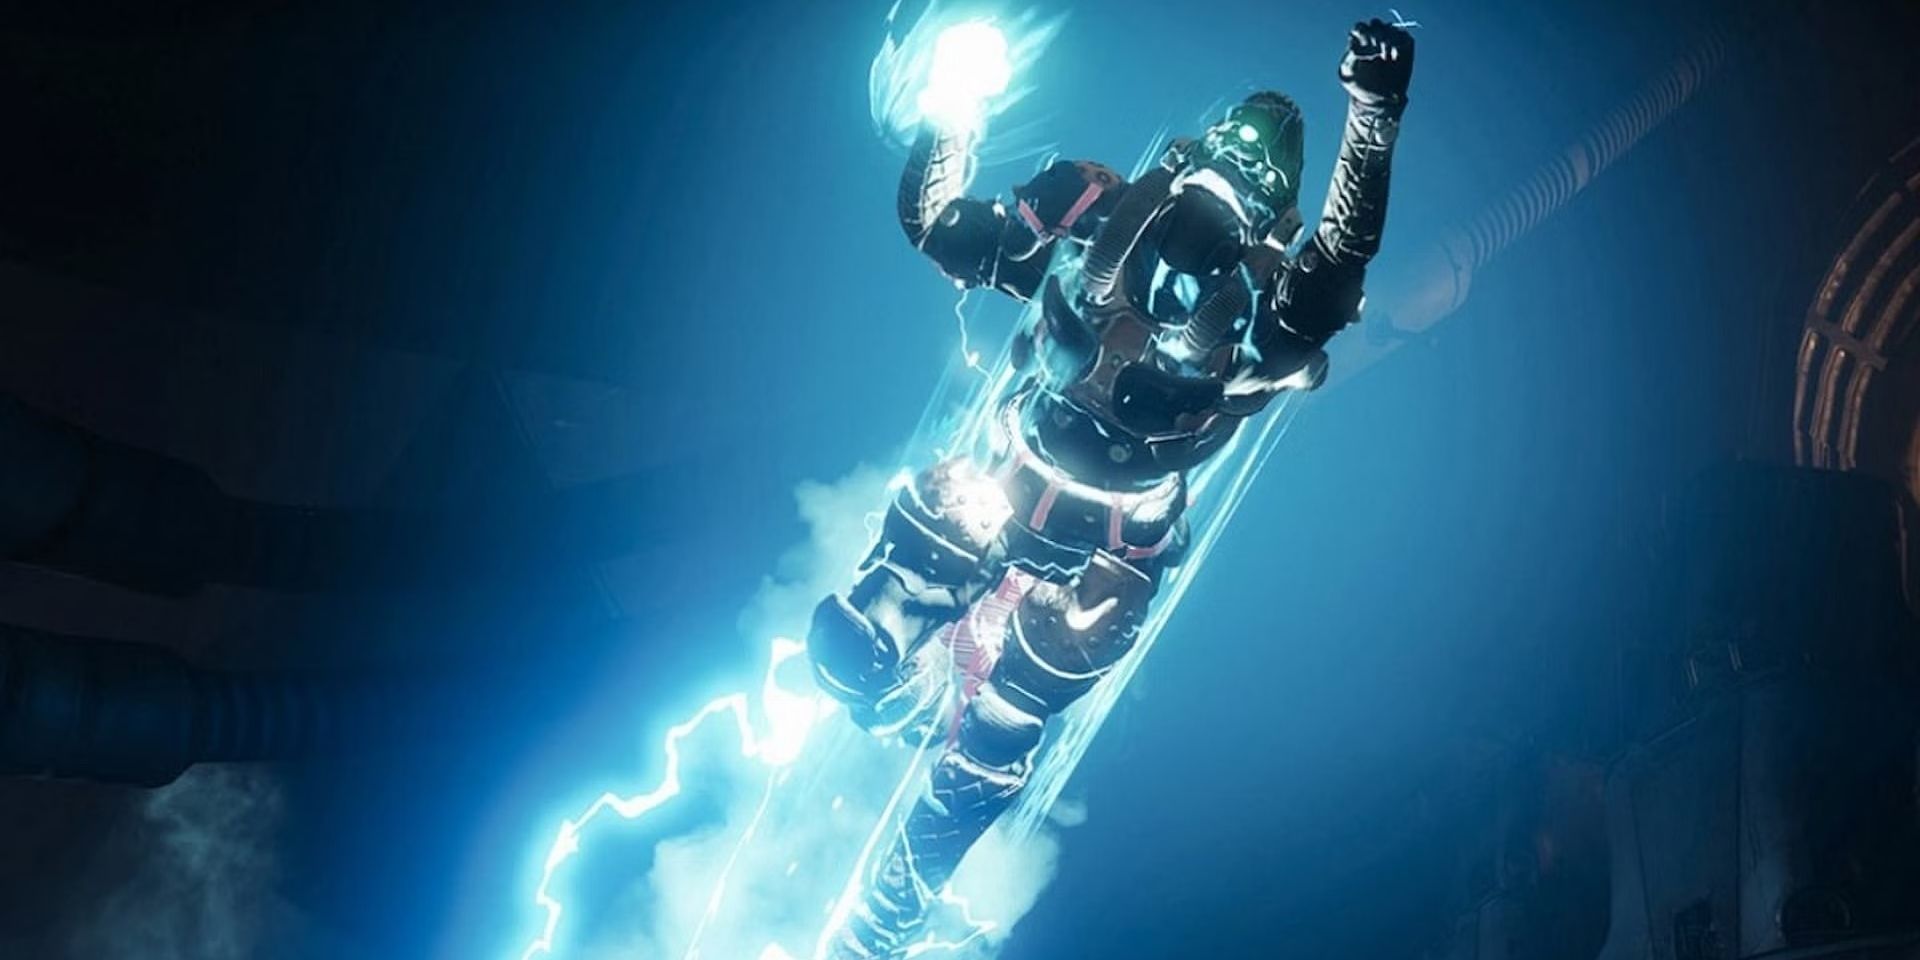 A Destiny 2 Titan using the Arc subclass Super ability Thundercrash, which sees them surrounded by electric Arc energy and flying through the sky ready to punch their opponent.